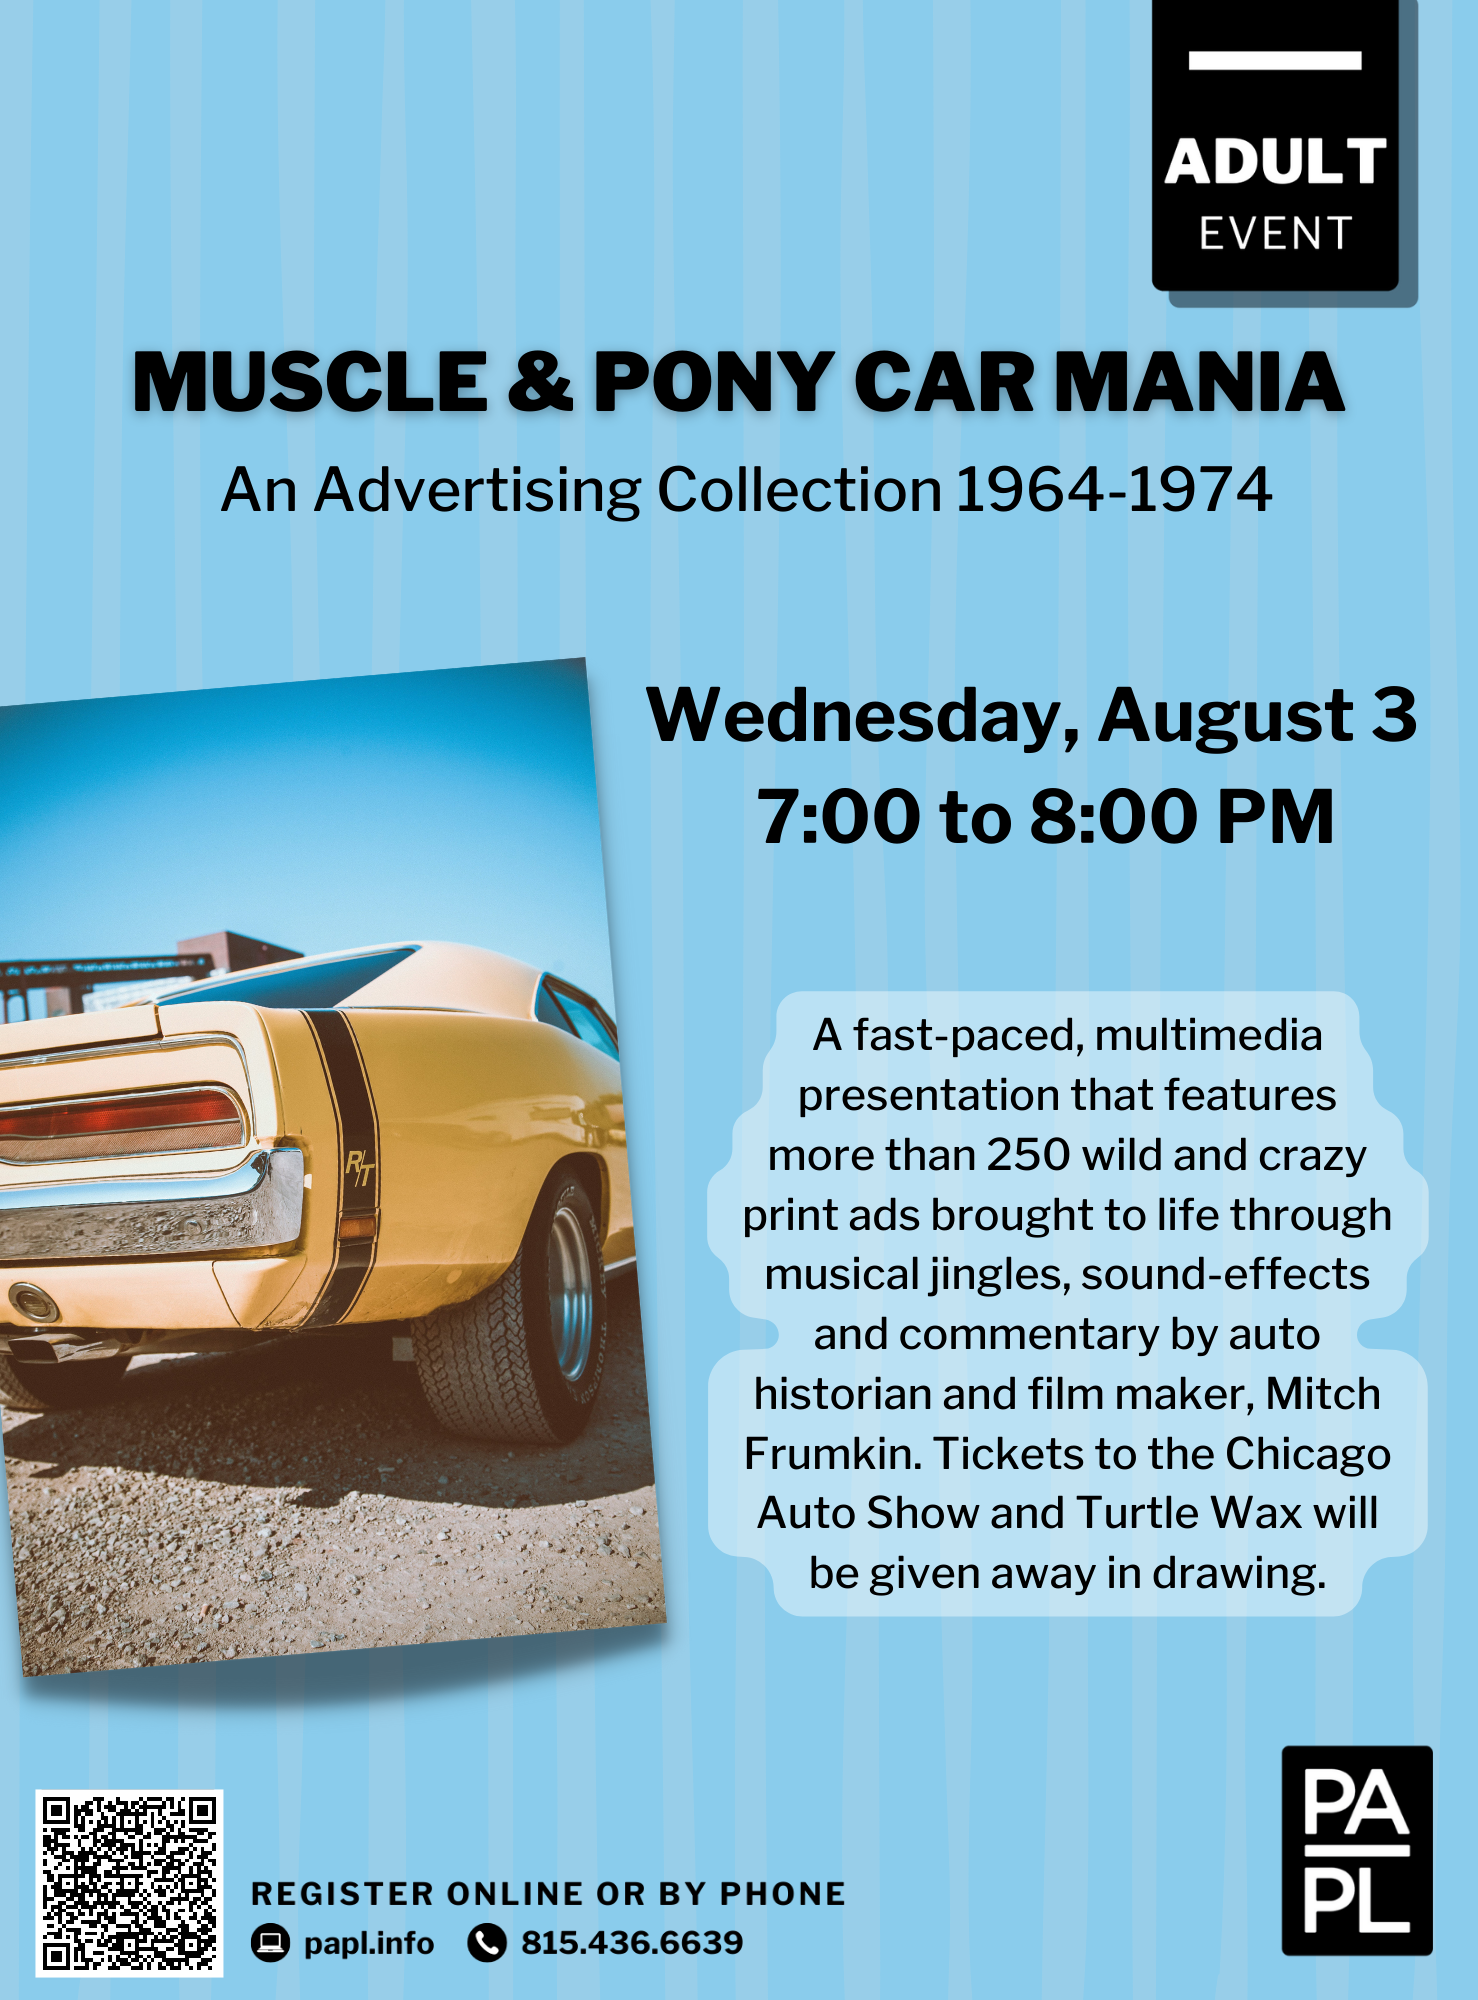 Muscle & Pony Car Mania: An Advertising Collection 1964-1974